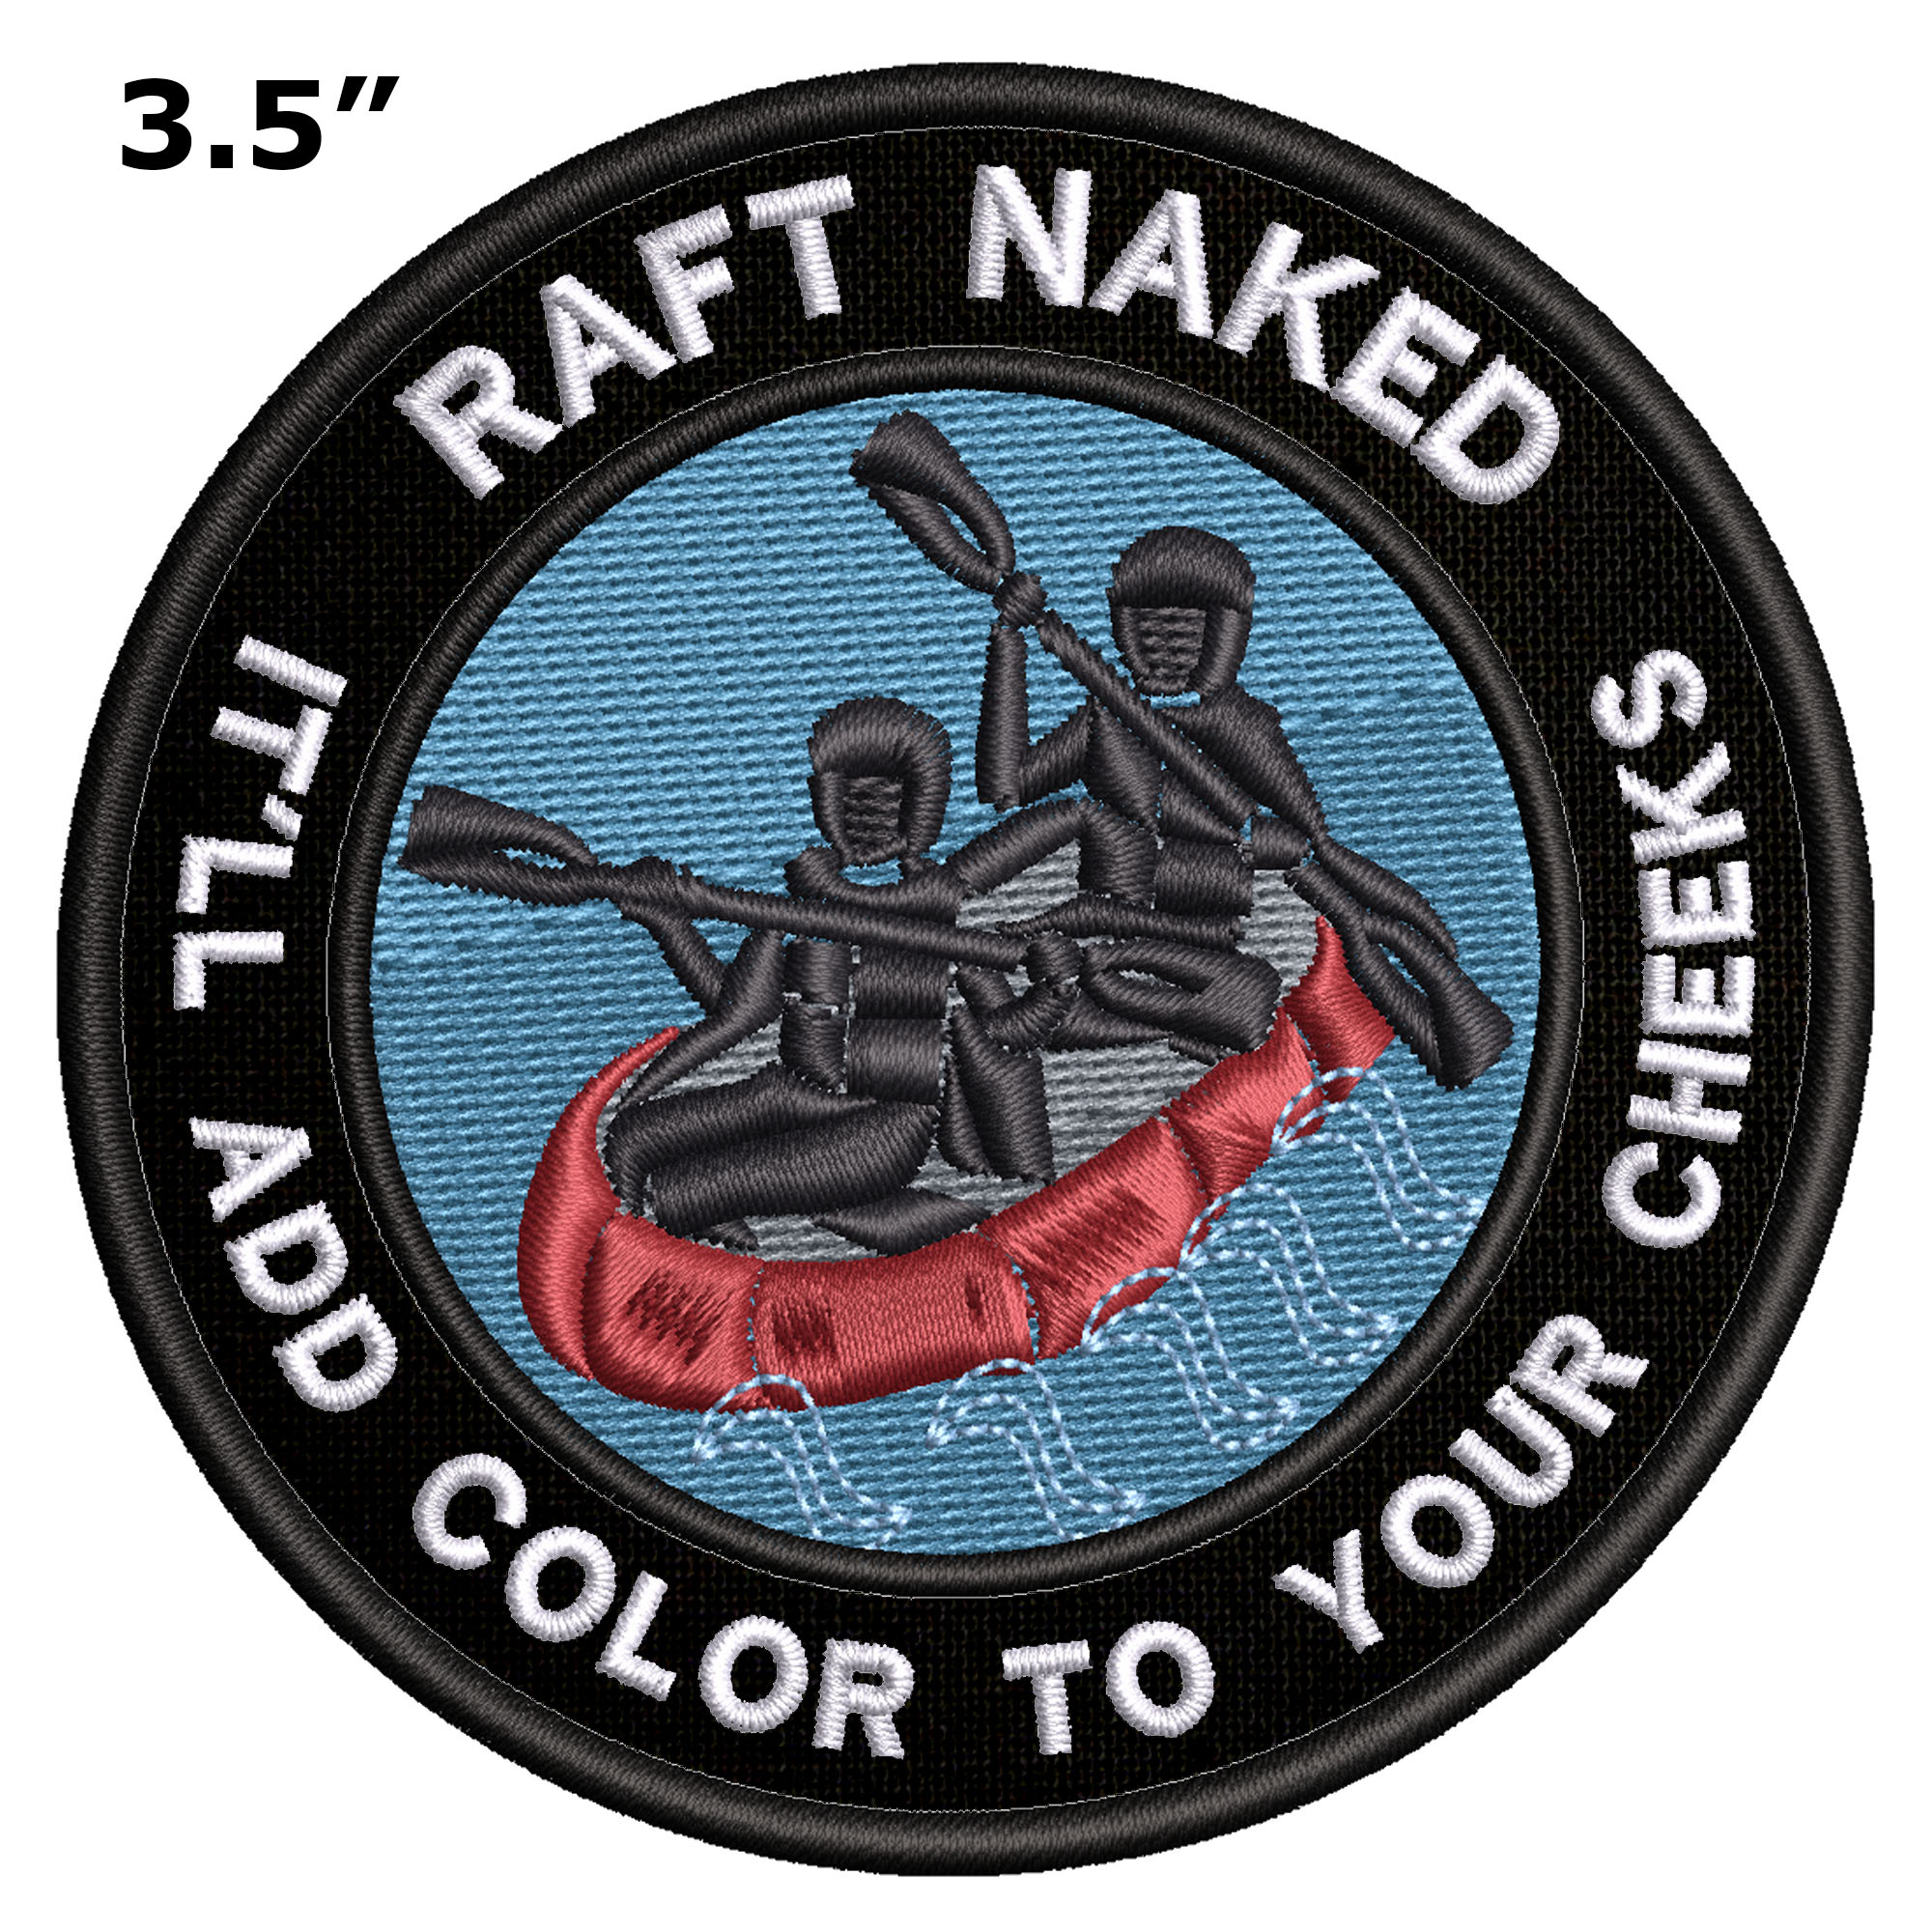 Applique Outdoors Rafting Naked Theme Hook Backing Decorative Patch Funny Saying Biker Emblem - image 2 of 2